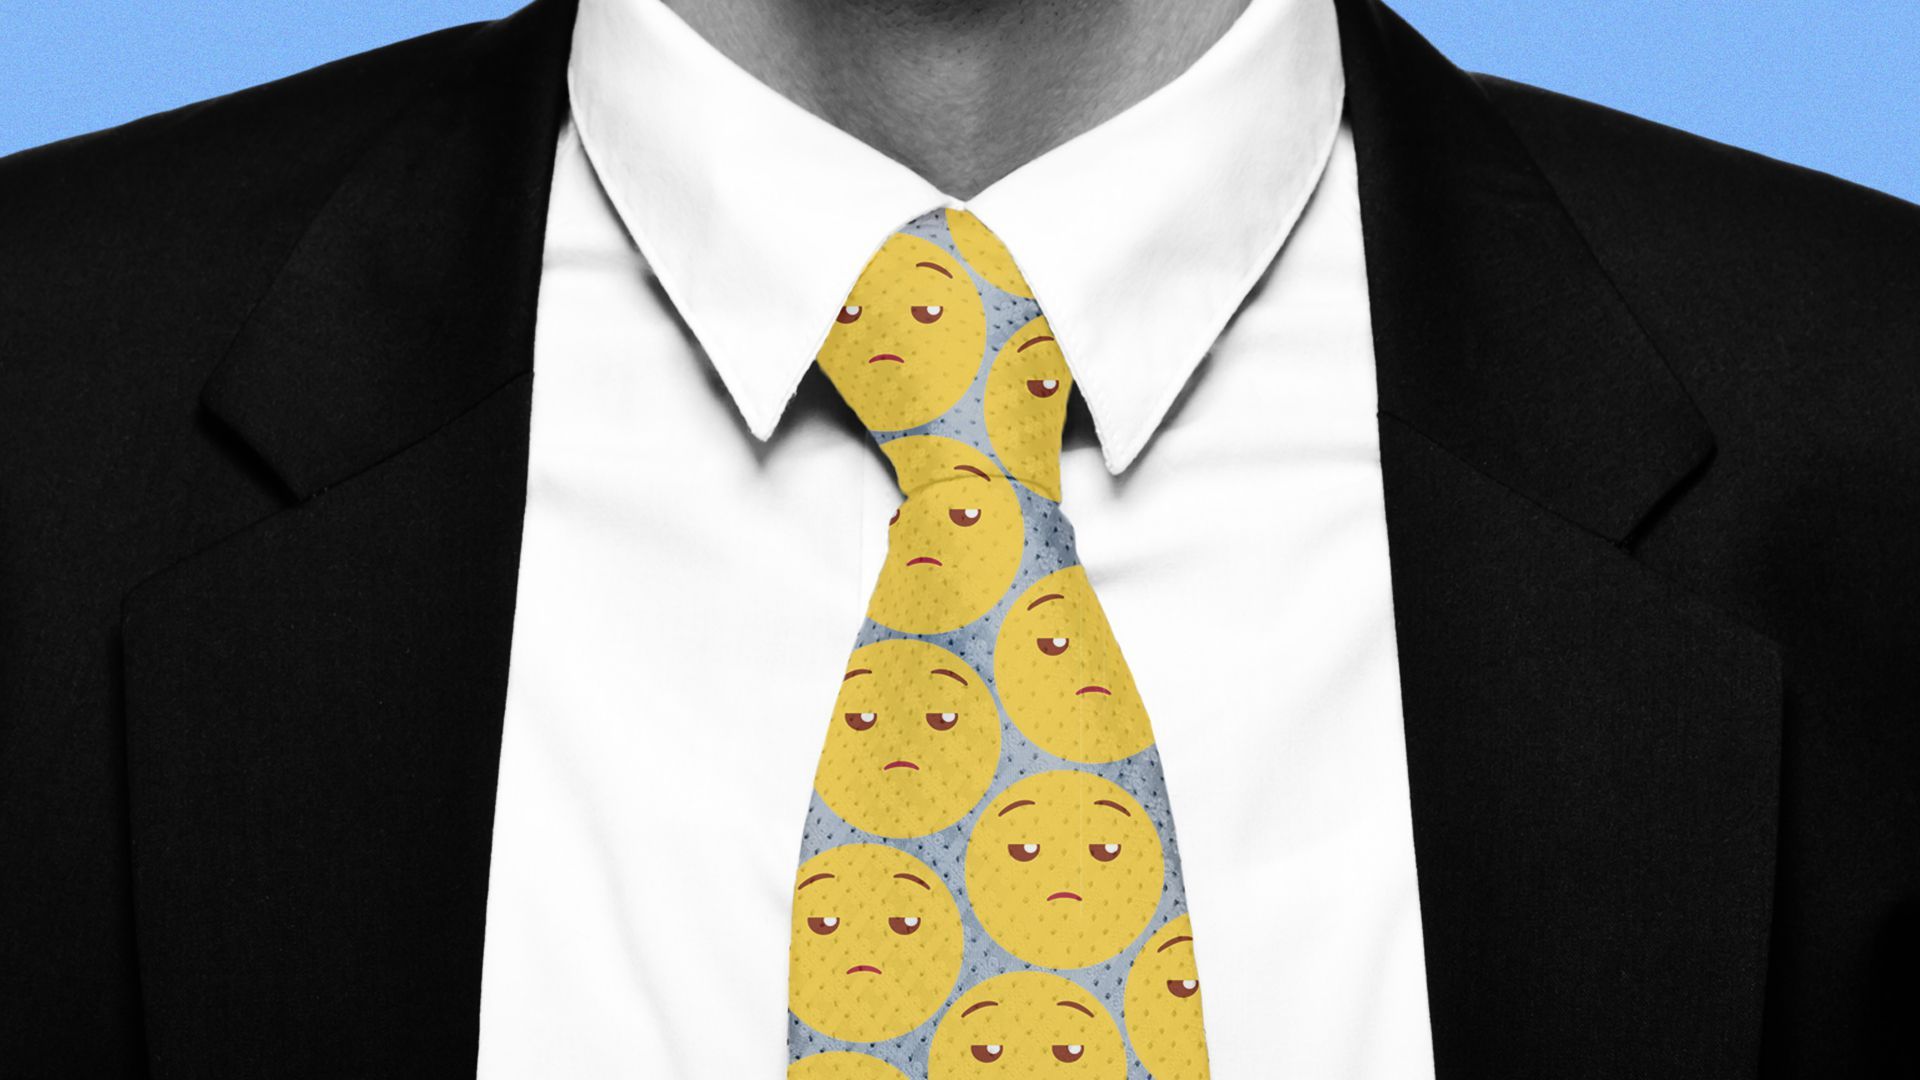 Illustration of a man wearing a tie with a pattern of “meh” emoji faces.